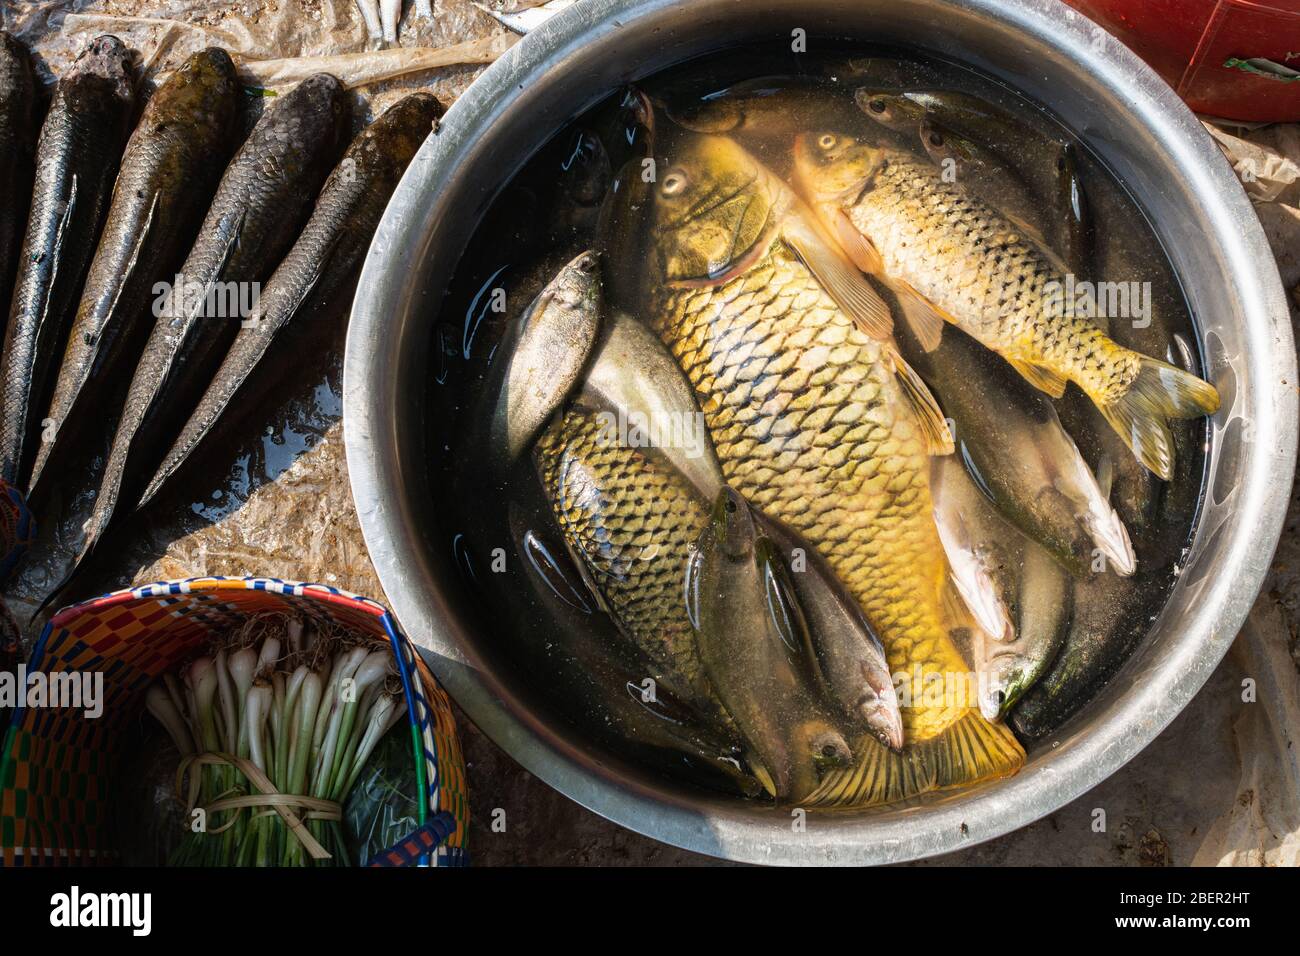 Inle lake fish in a bucket on the market of Indein, Myanmar. Stock Photo